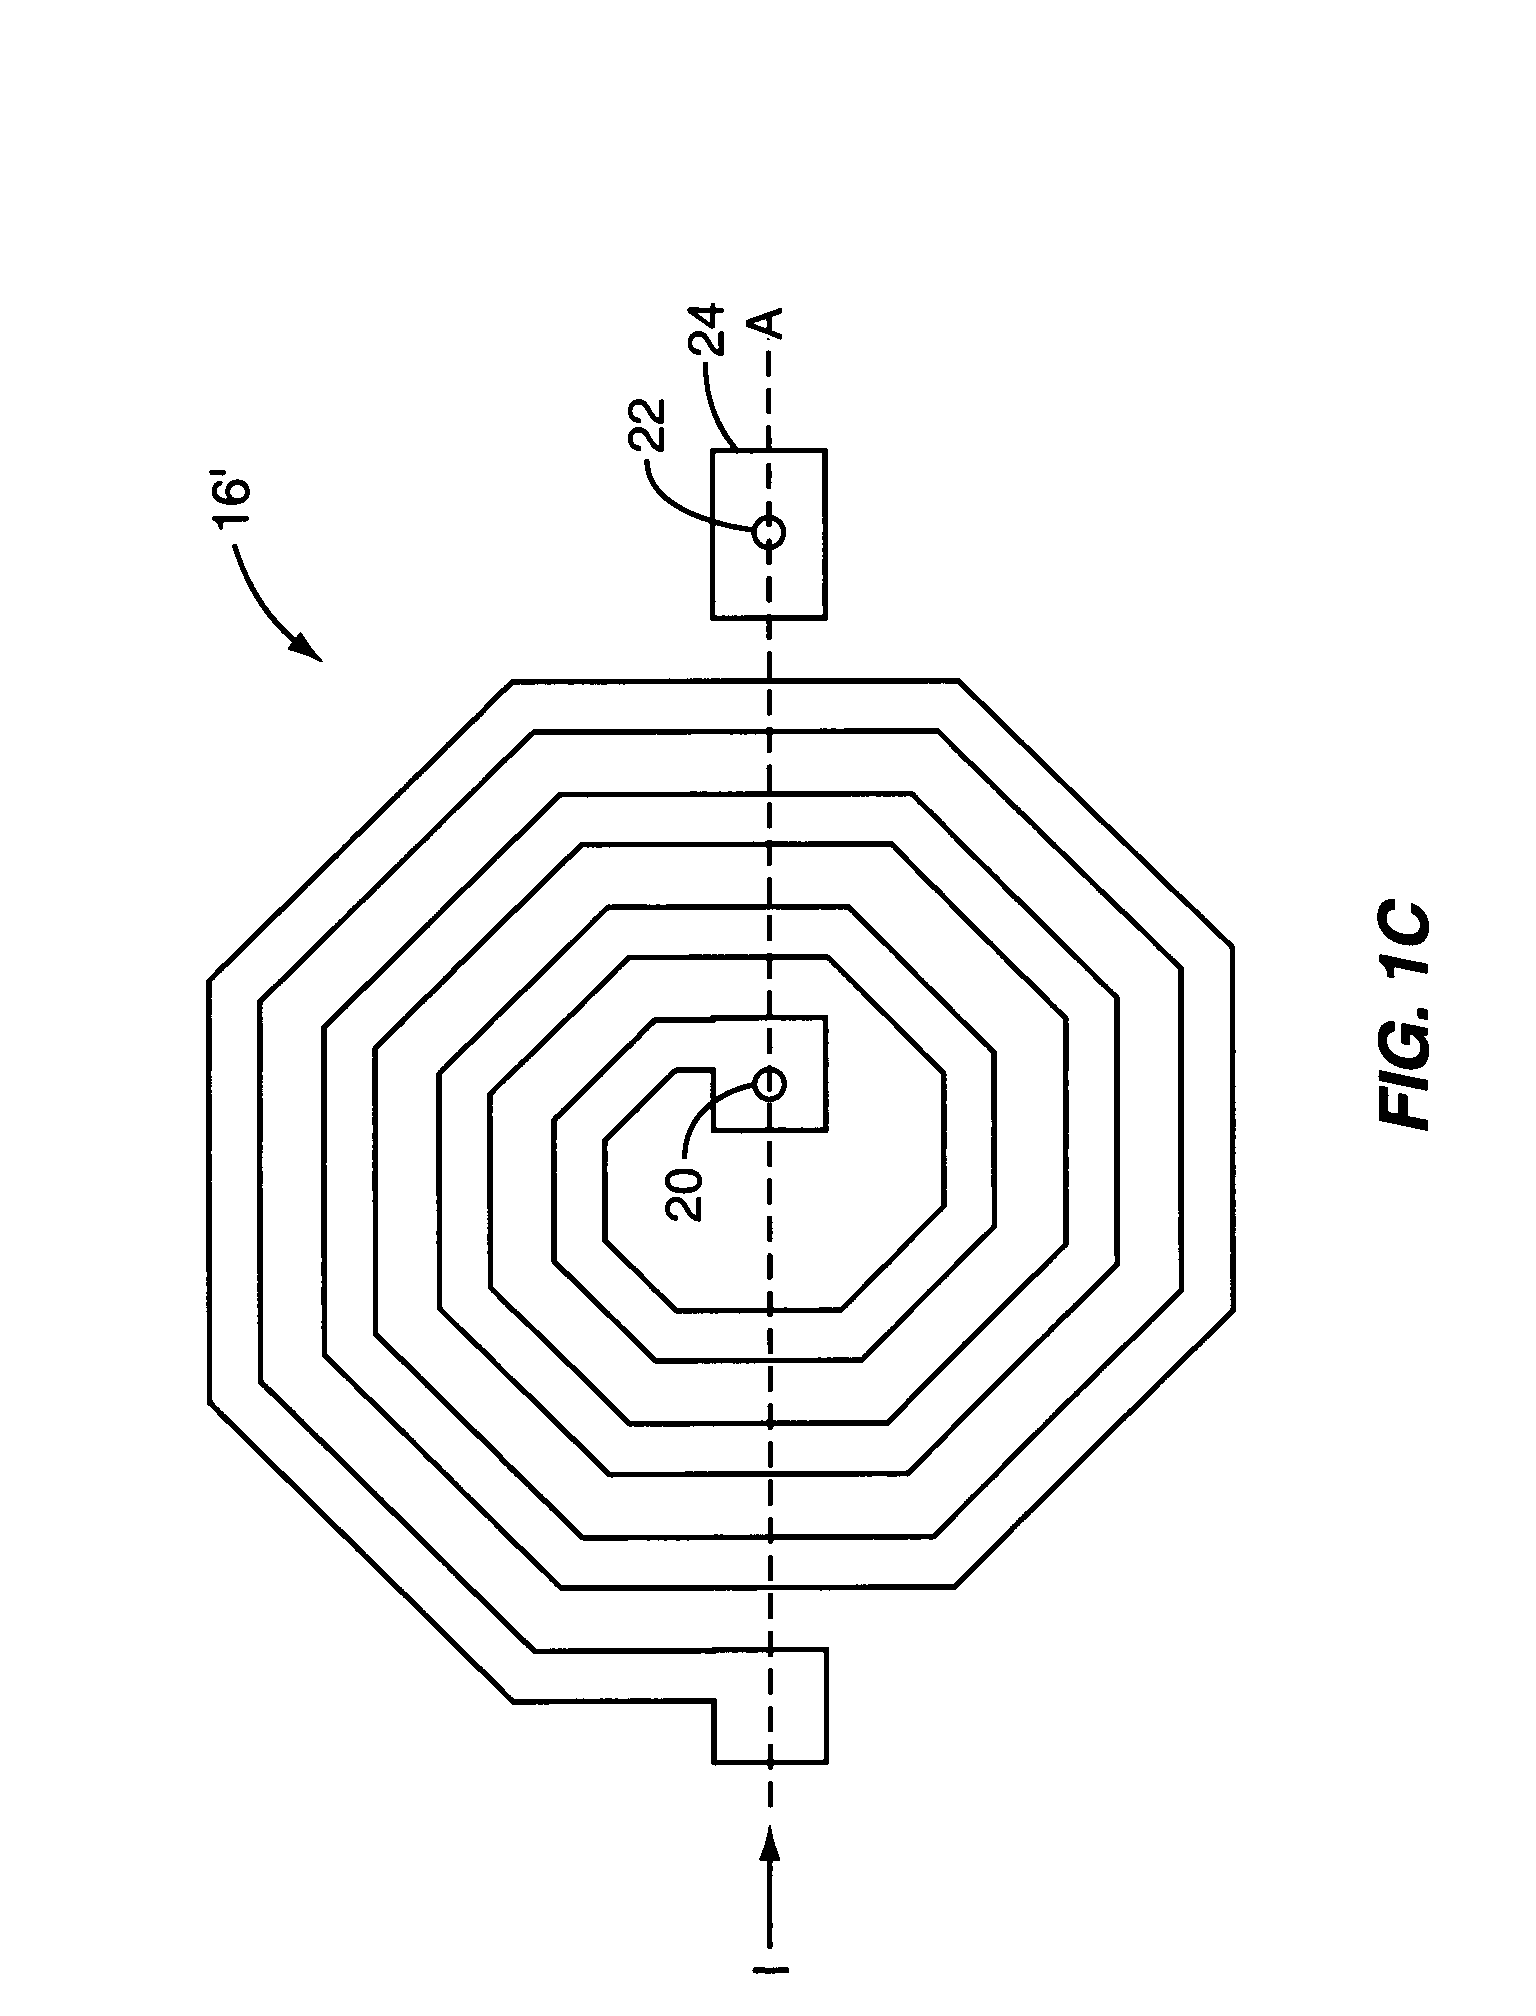 Circuit board embedded inductor